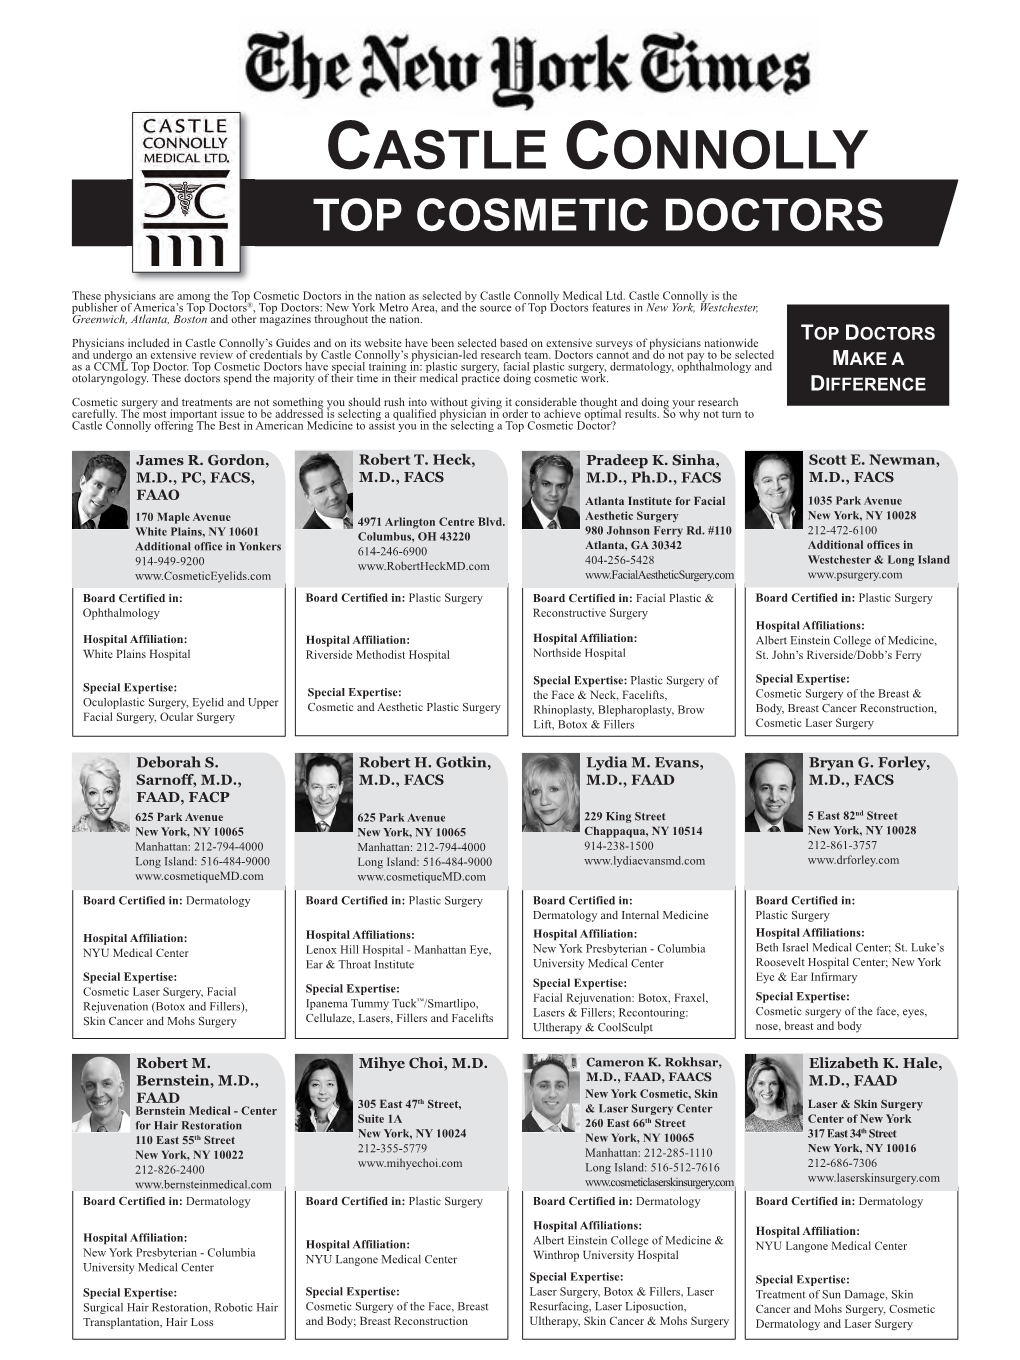 Castle Connolly Top Cosmetic Doctors